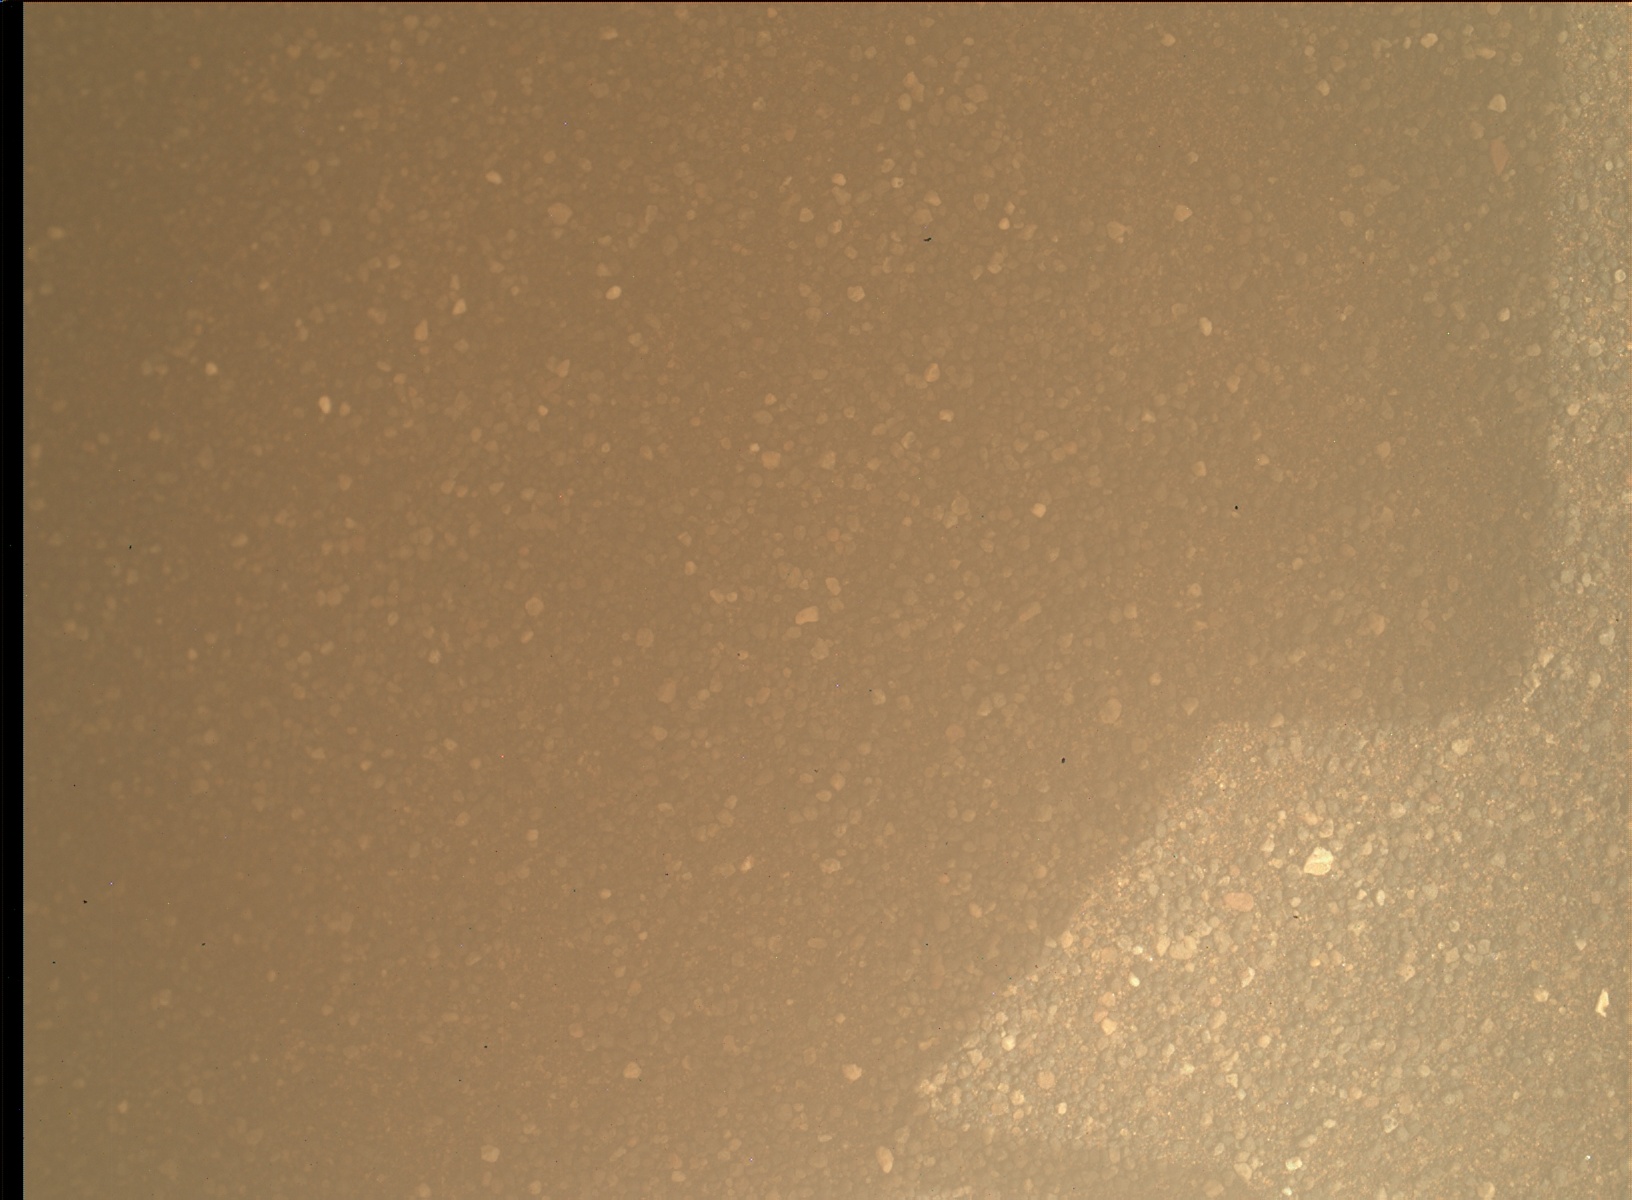 Nasa's Mars rover Curiosity acquired this image using its Mars Hand Lens Imager (MAHLI) on Sol 1519